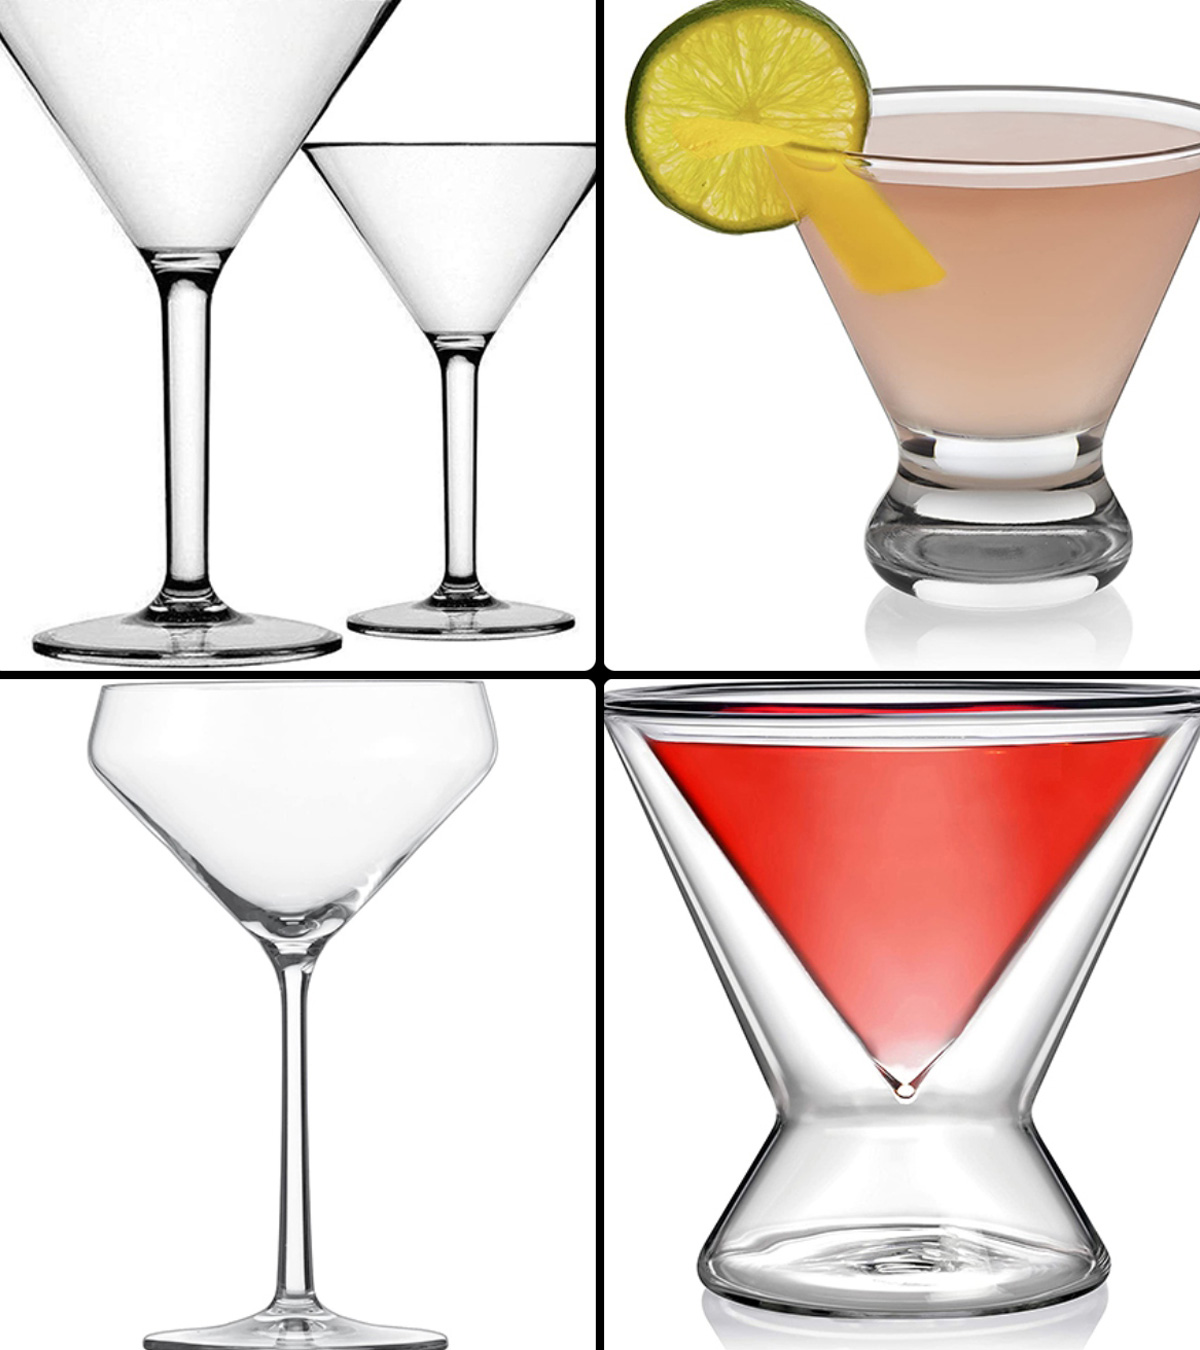 11 Best Martini Glasses in 2023: Reviews and Buying Guide